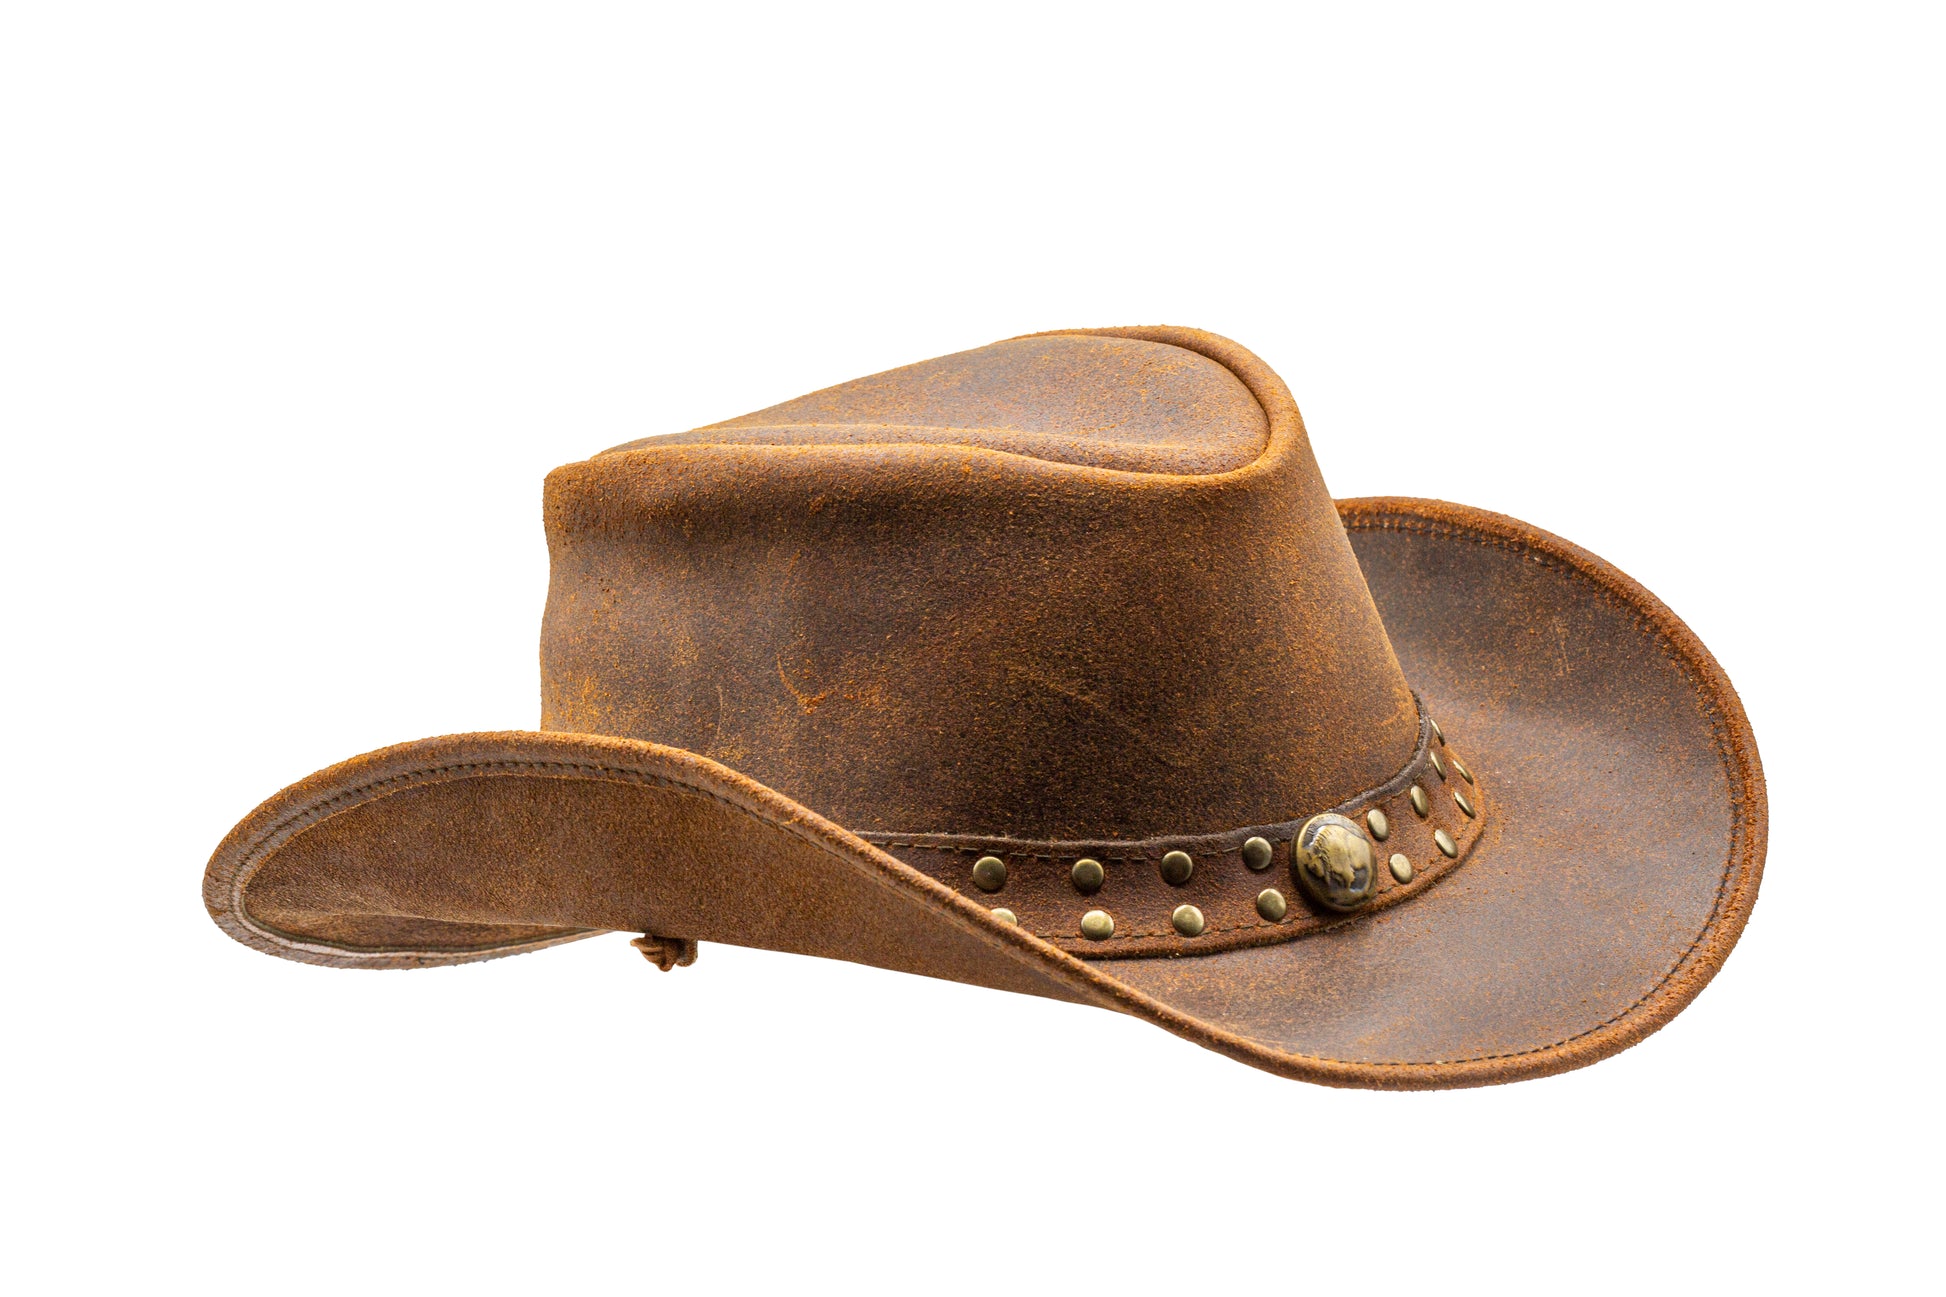 red leather cowboy hat western style shapeable as outback best gift for men women him her mom dad boyfriend girlfriend friends 